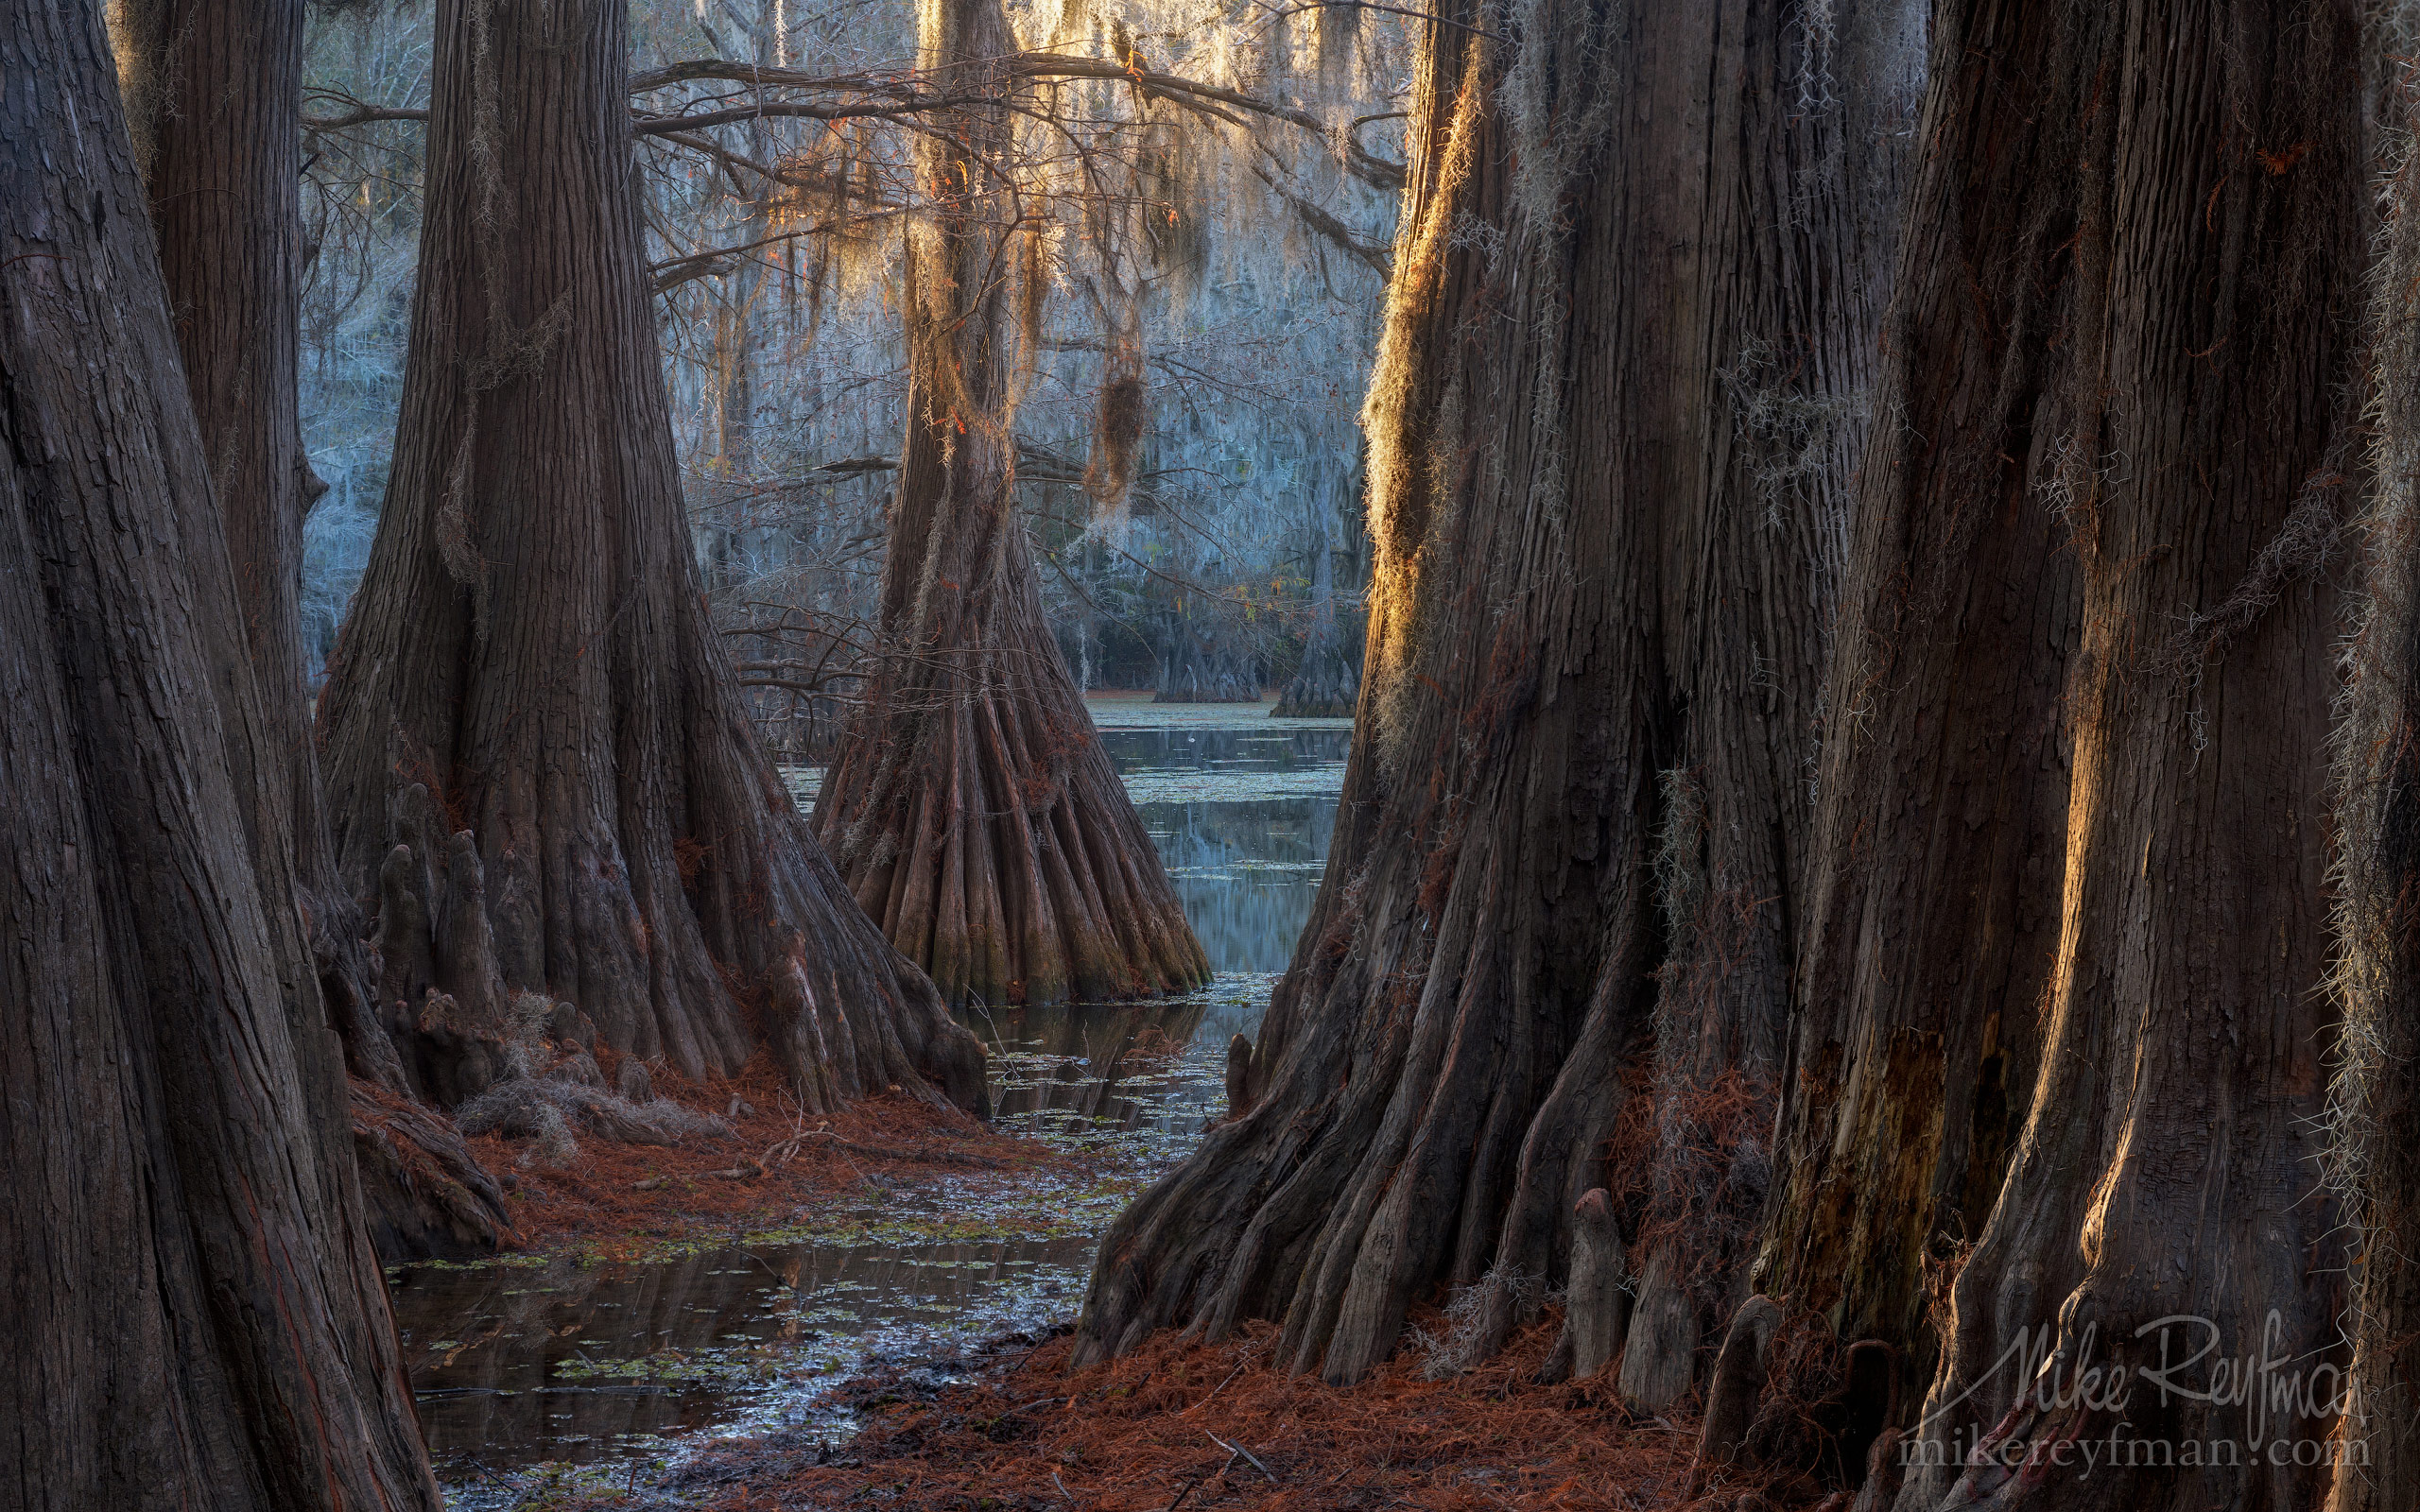 Bald Cypress trees in the swamp. Caddo Lake, Texas, US